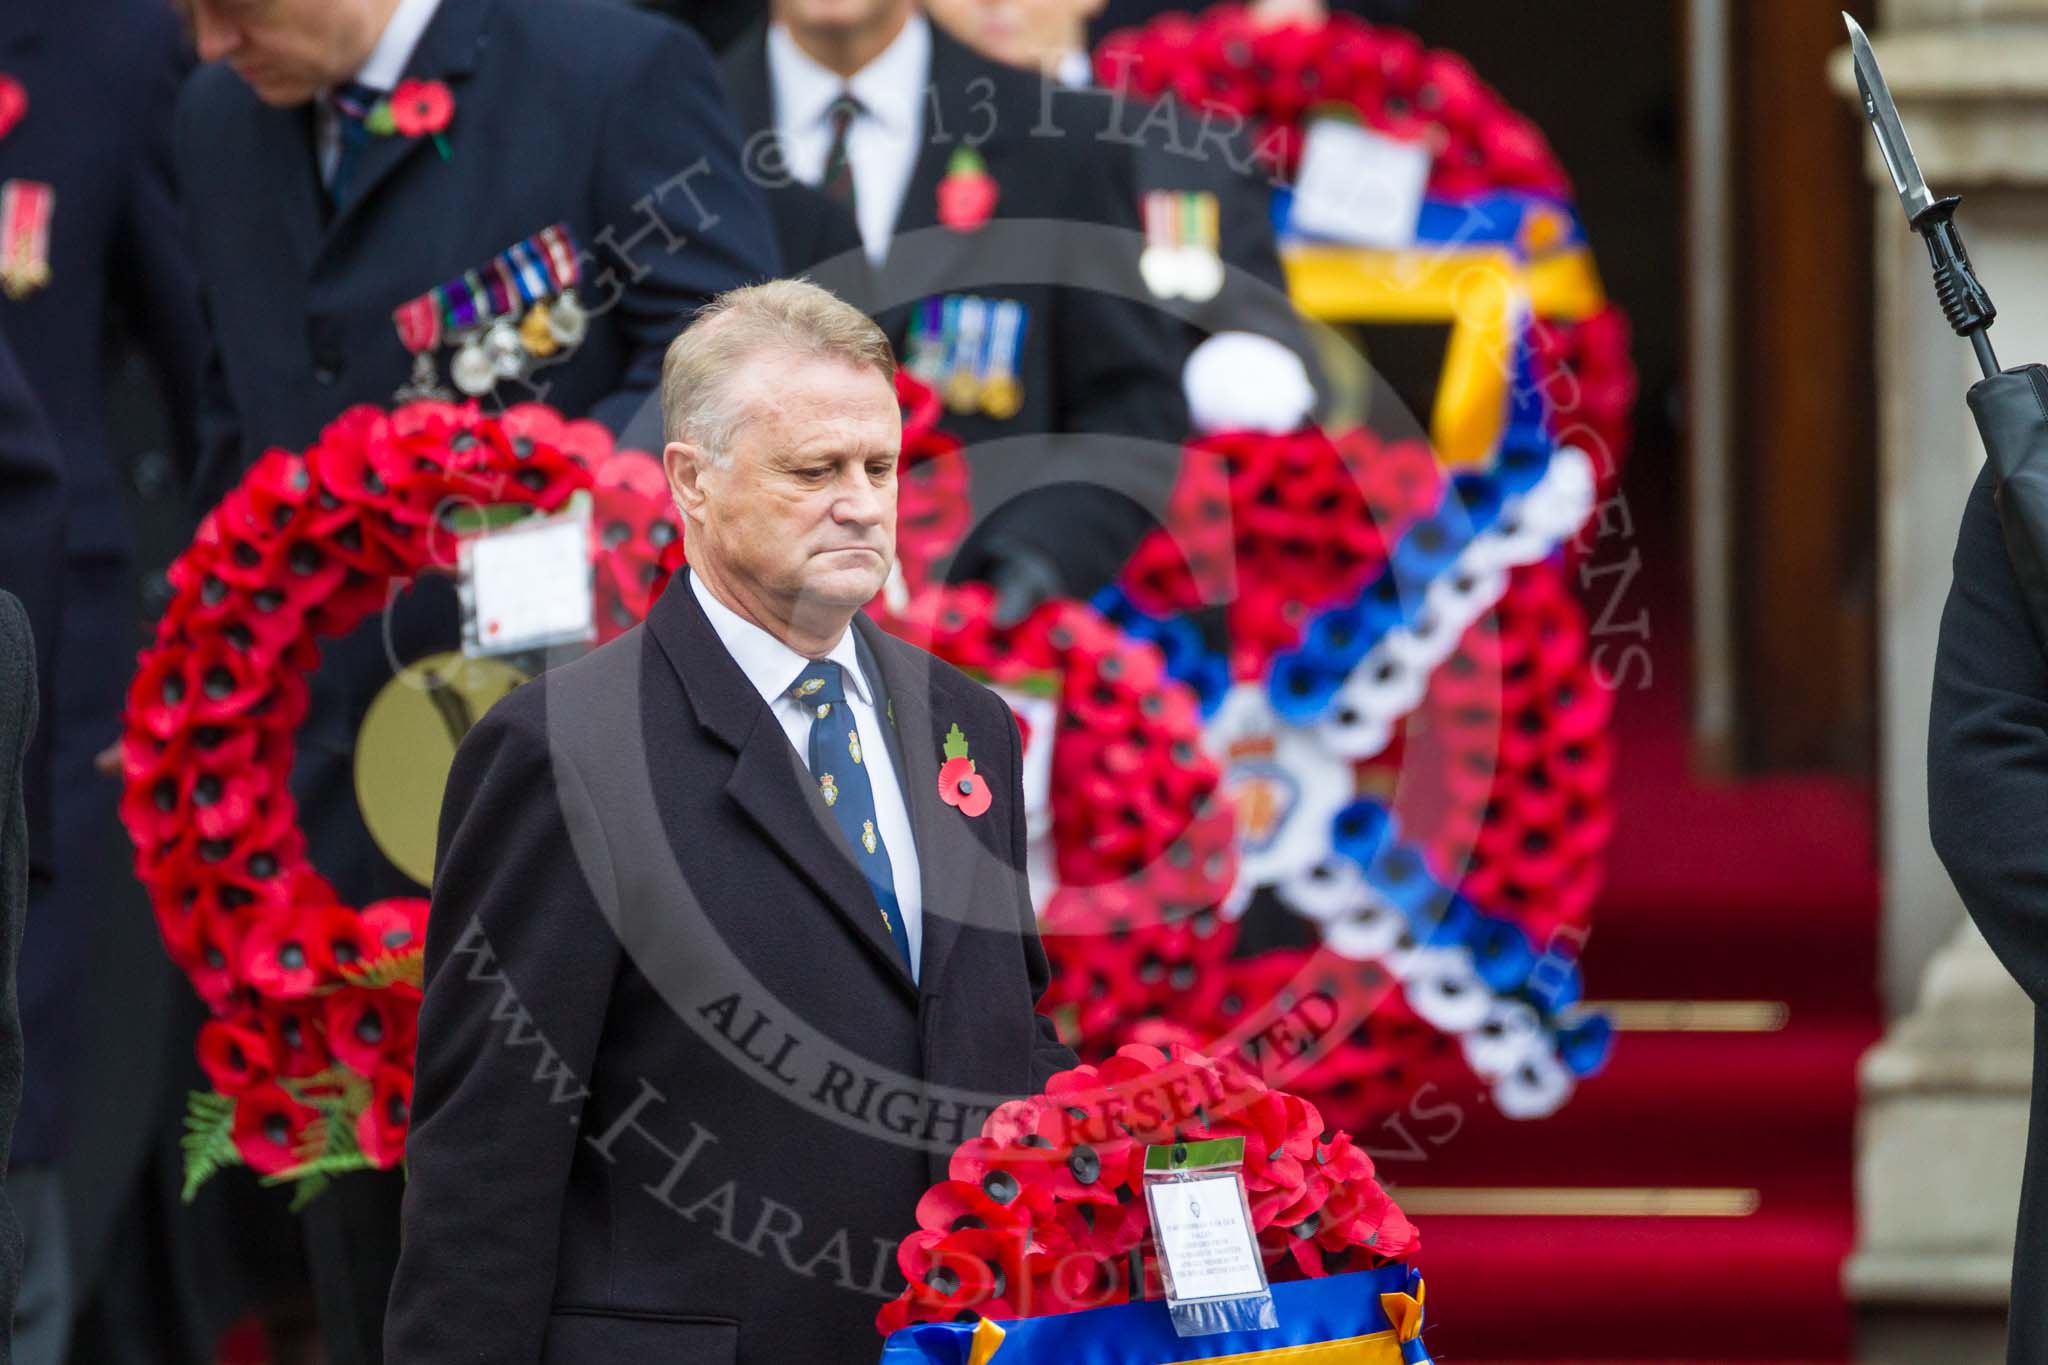 Remembrance Sunday at the Cenotaph 2015: Leading members of the Royal British Legion leaving the Foreign- and Commonwealth Office. Image #65, 08 November 2015 10:40 Whitehall, London, UK